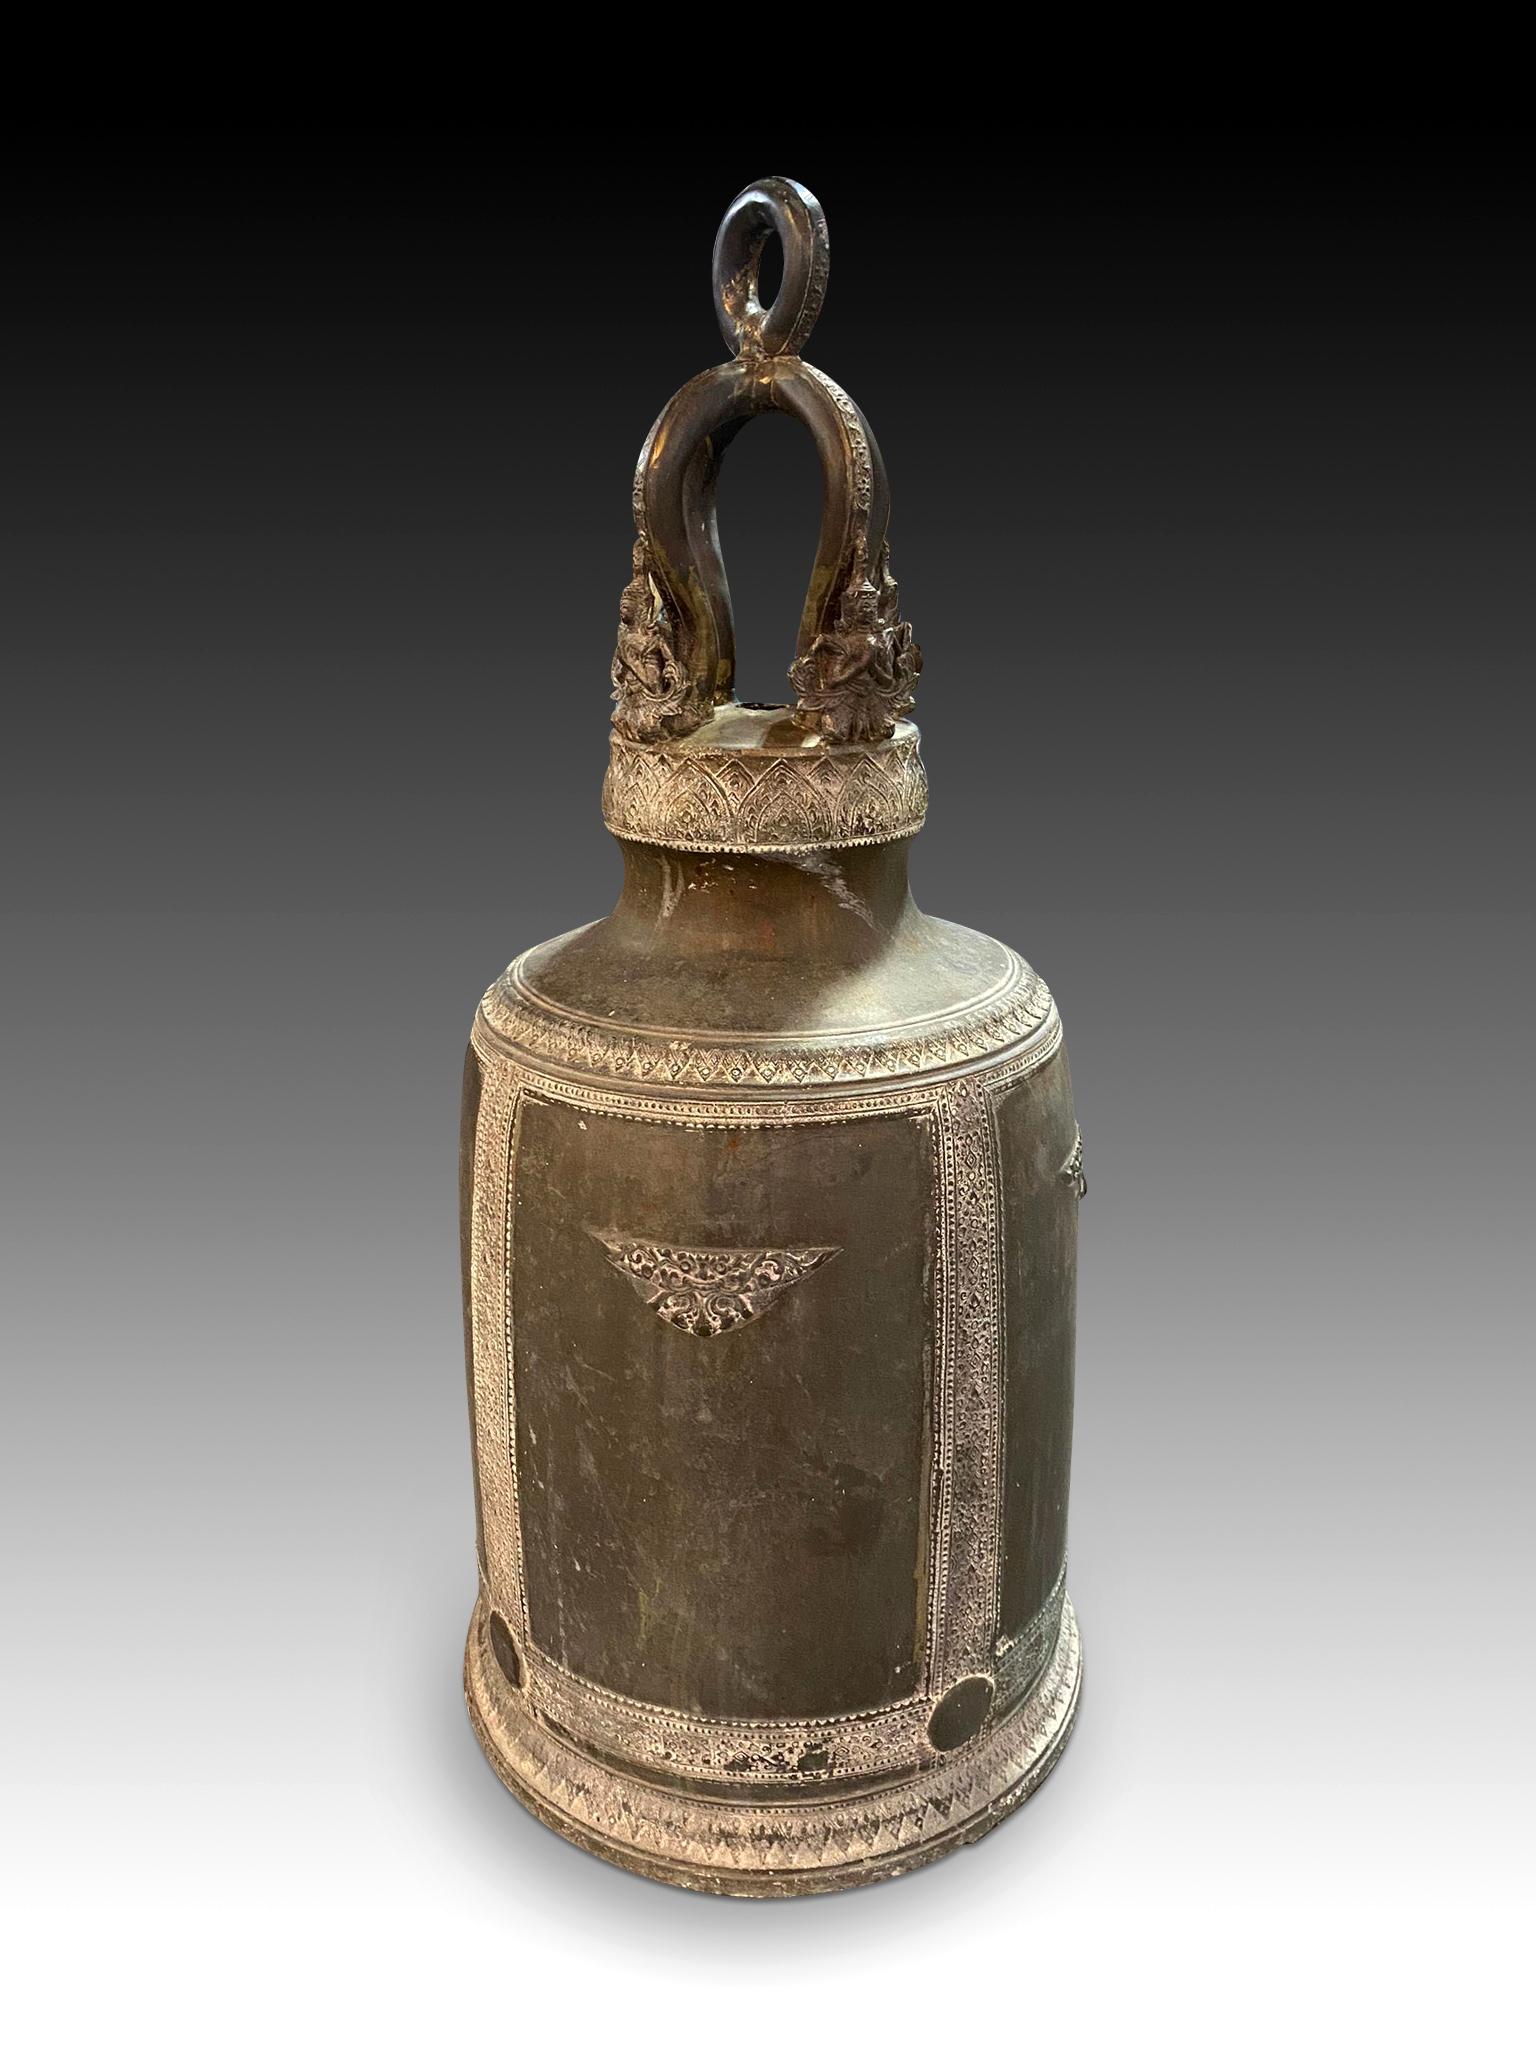 Bronze bell. India, 20th century. 
Bell made of bronze with a tall body and an oval base, almost rectangular in height, which has an elaborate upper part with smooth areas and figures of the same material. In addition to these, it has been decorated